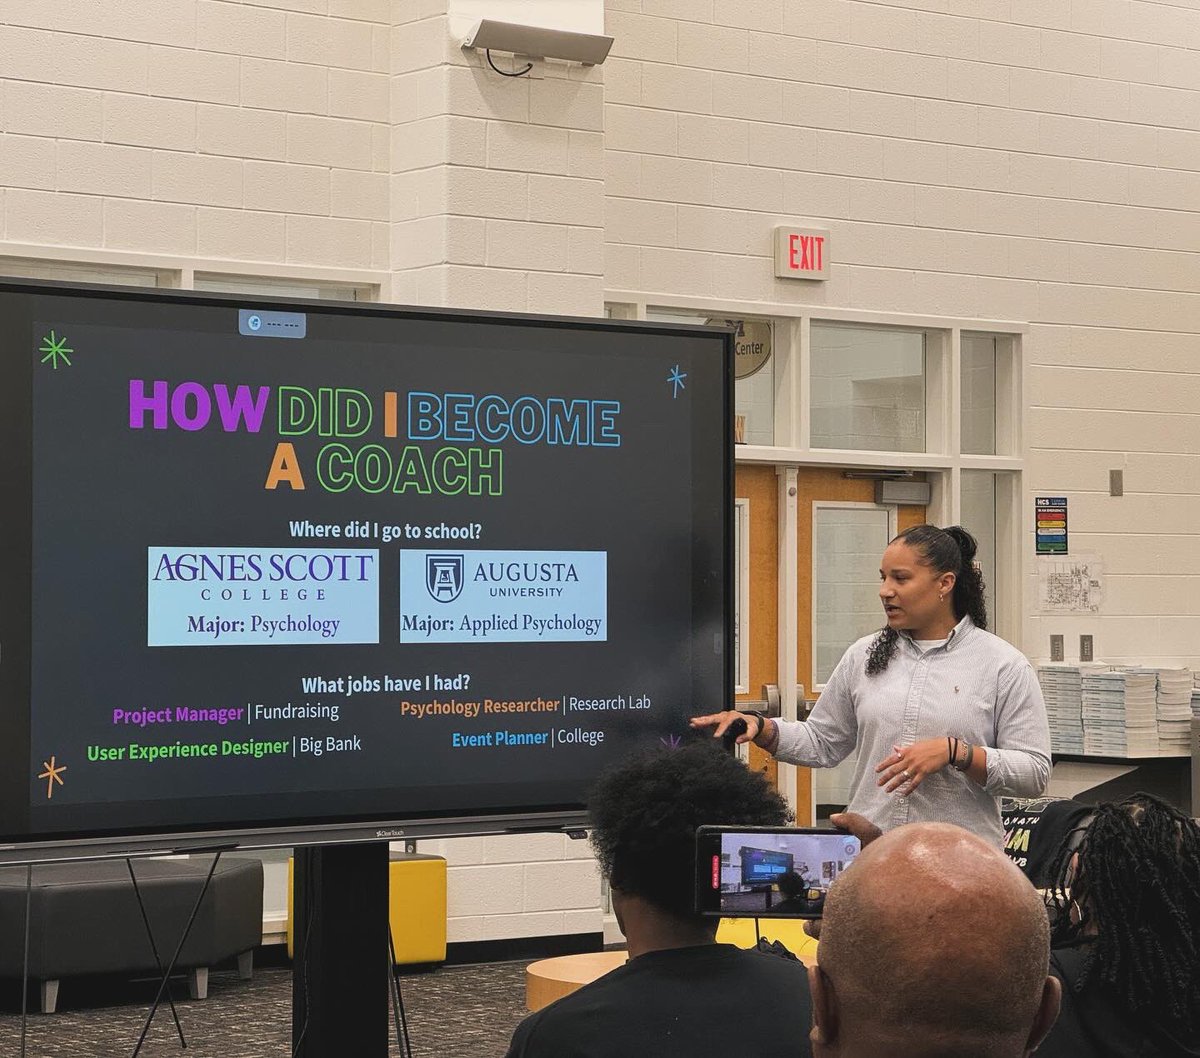 Preparing young scholars for the careers of the future! Our Learning Innovation Coach, Pilar Ramos shared tech career guidance and advice with students at the McDonough High School STEAM Symposium and Celebration in Henry County! @TriMATHleteUSA @PrincipalBGame @MHSBioMathClub